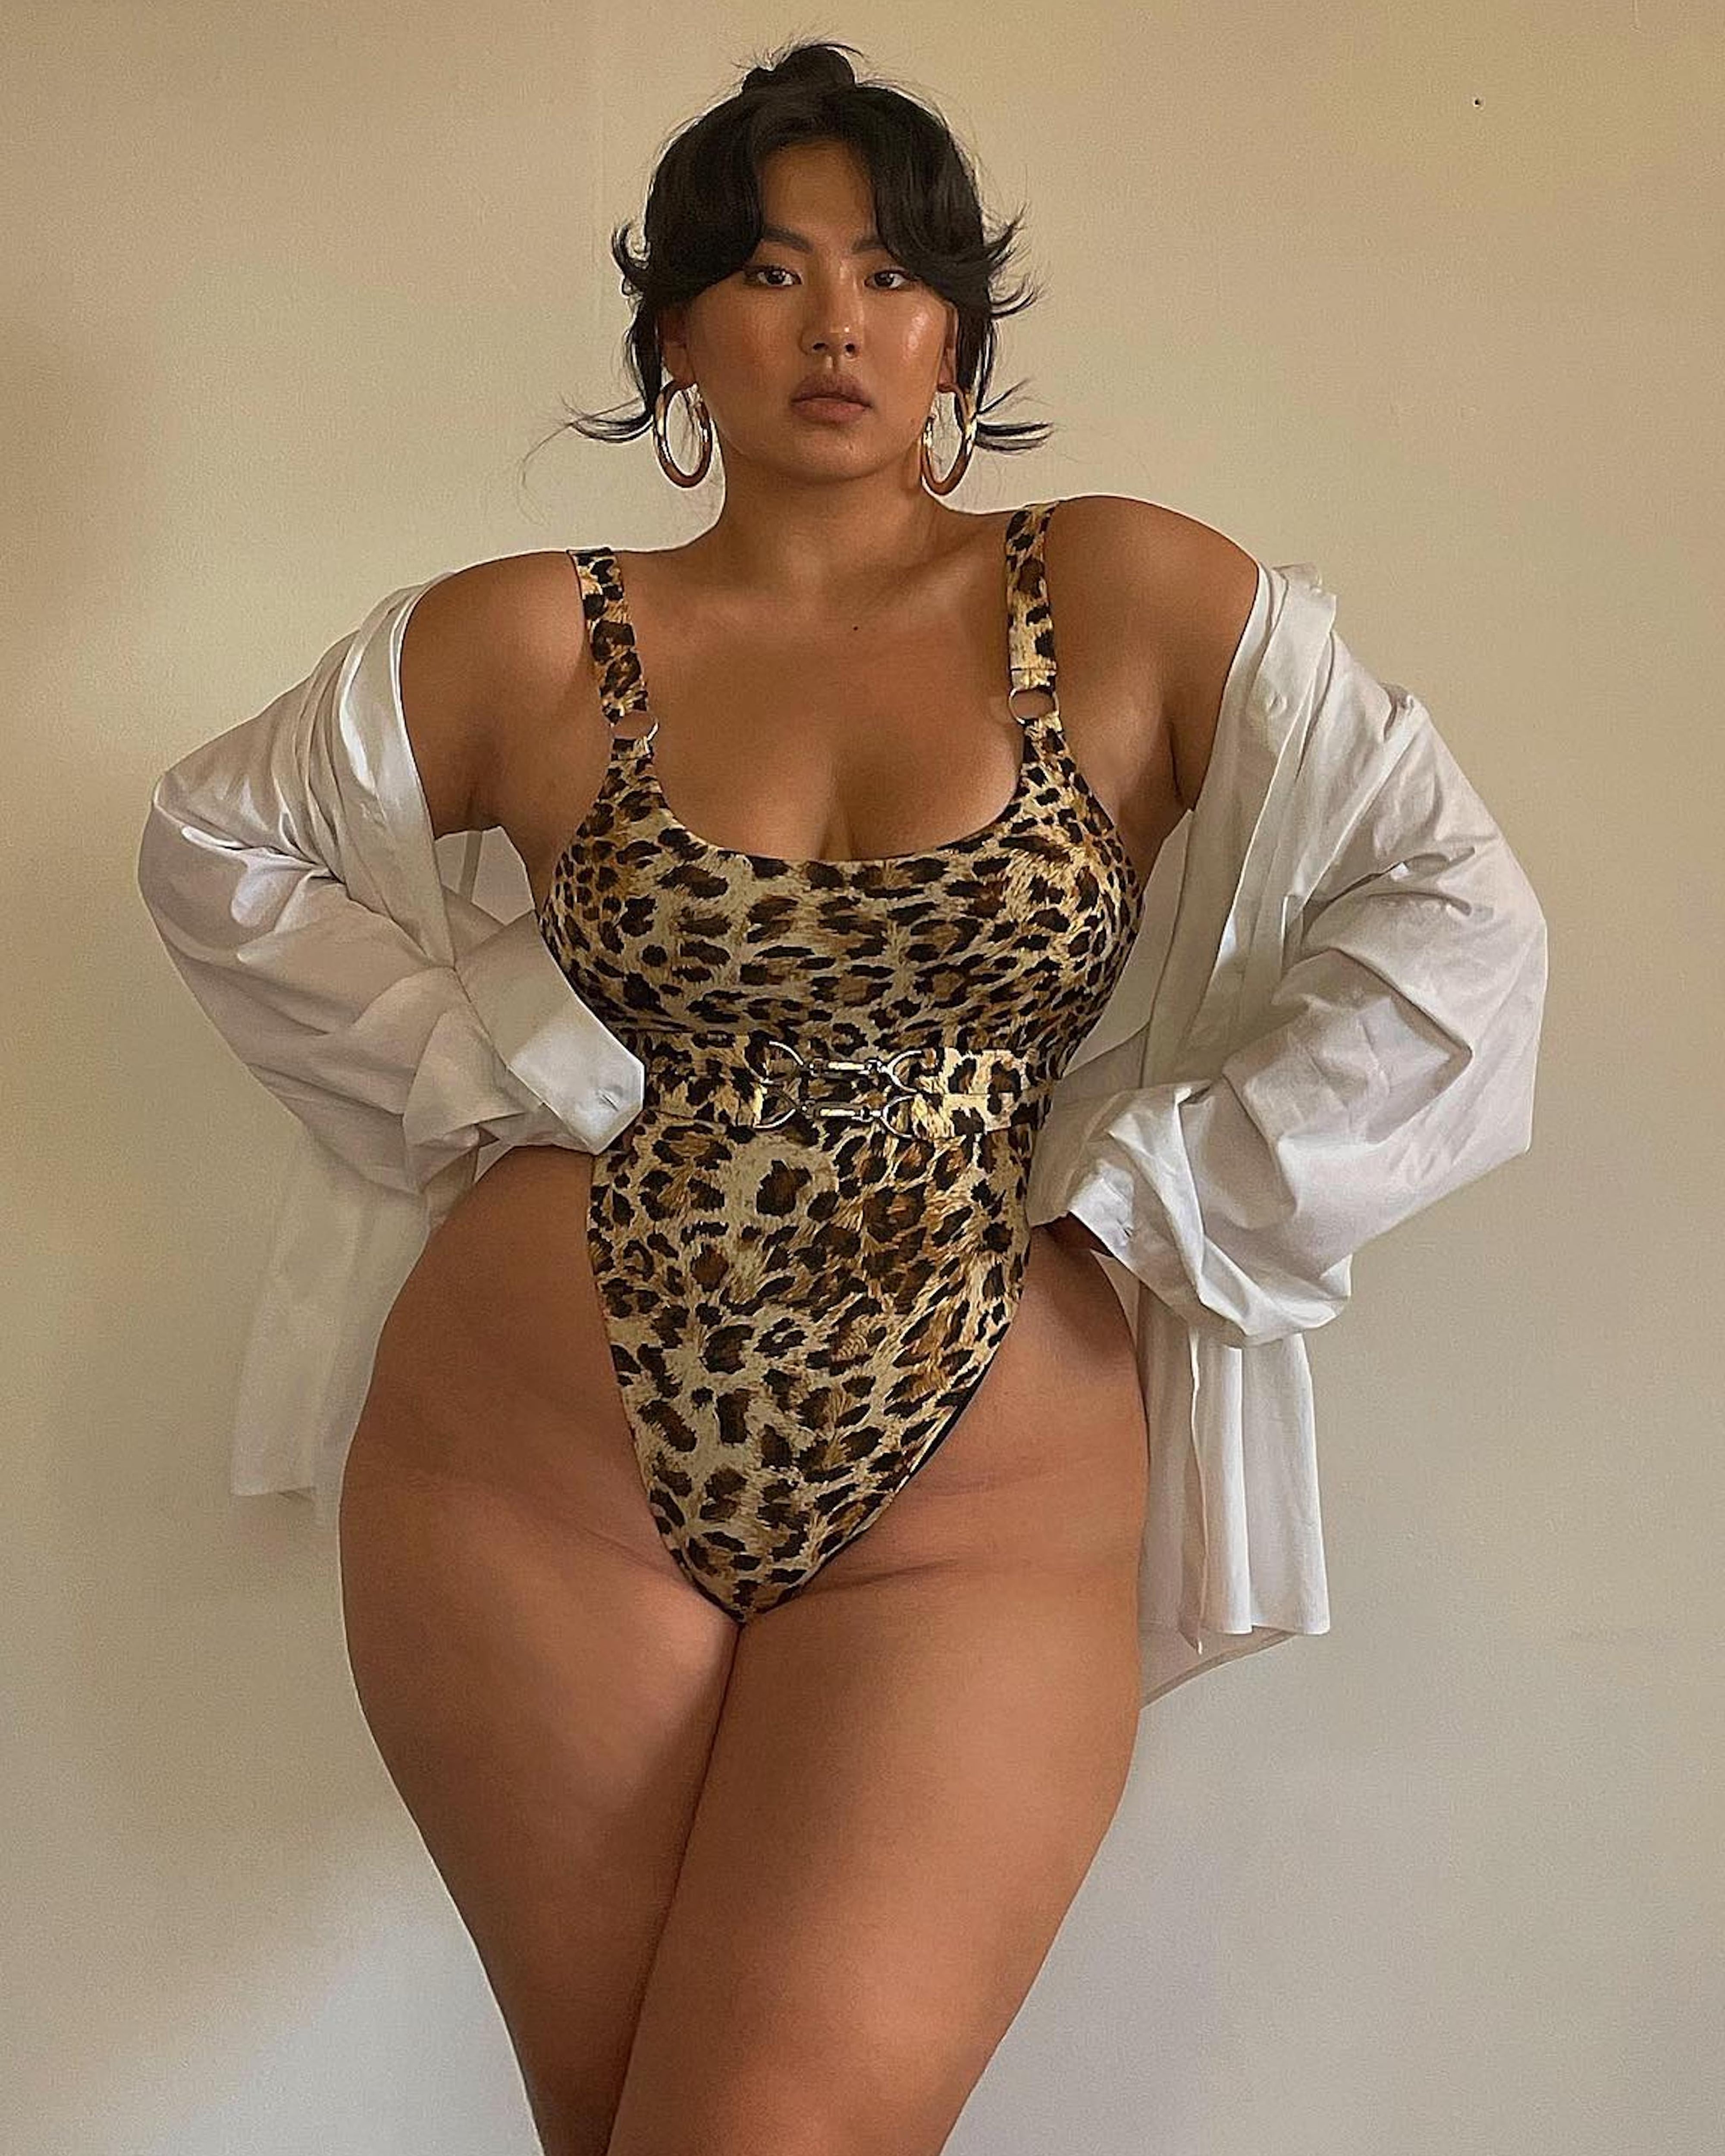 This Curvaceous Model Is Showing Off Her Plus-Size Look In An Effort To  Celebrate Big Bums